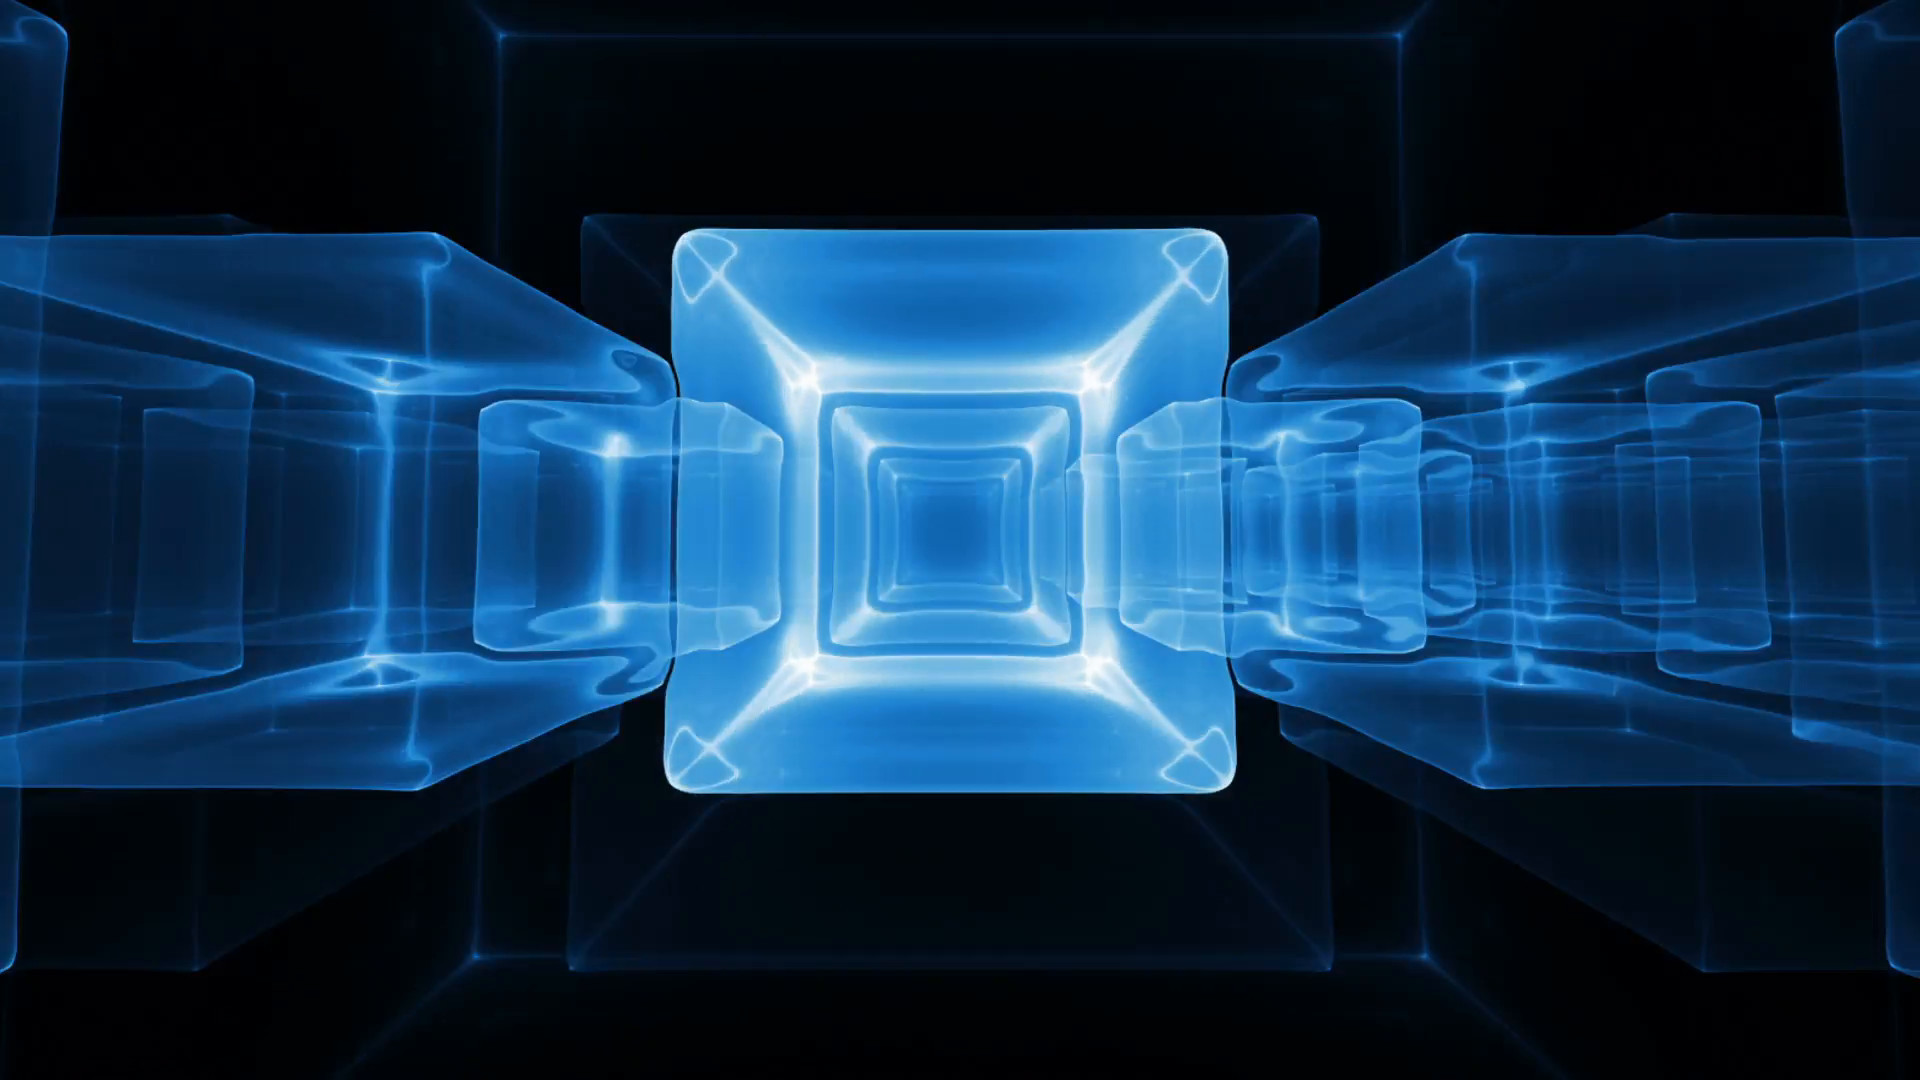 1920x1080 Wallpapers For > Awesome Neon Blue Backgrounds